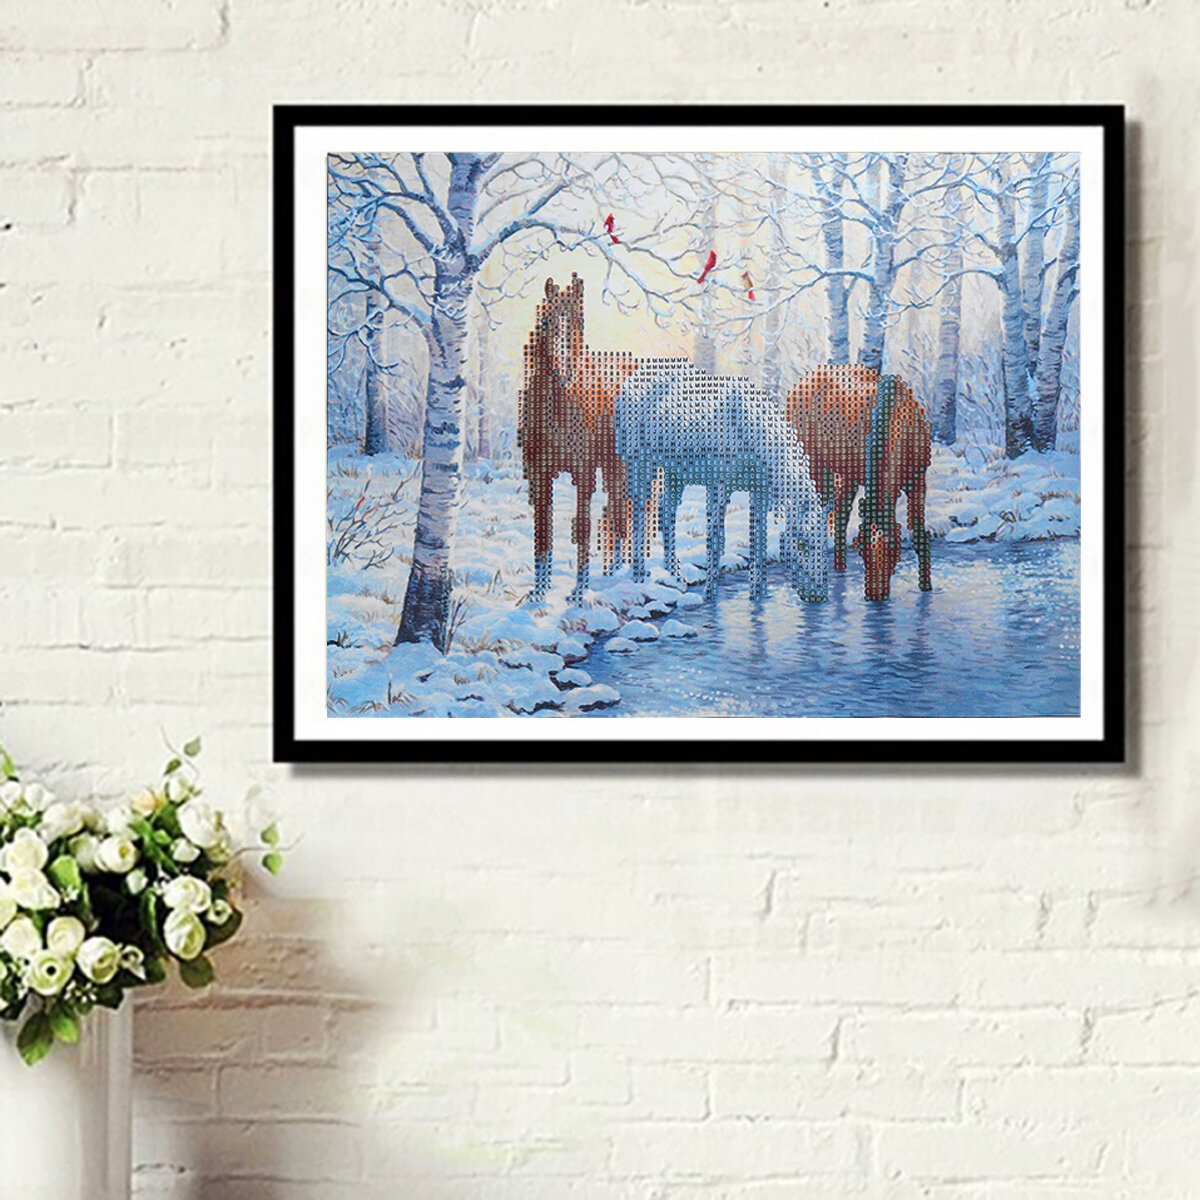 

DIY 5D Diamond Painting Winter Horse Art Craft Embroidery Stitch Kit Handmade Wall Decorations Gifts for Kids Adult